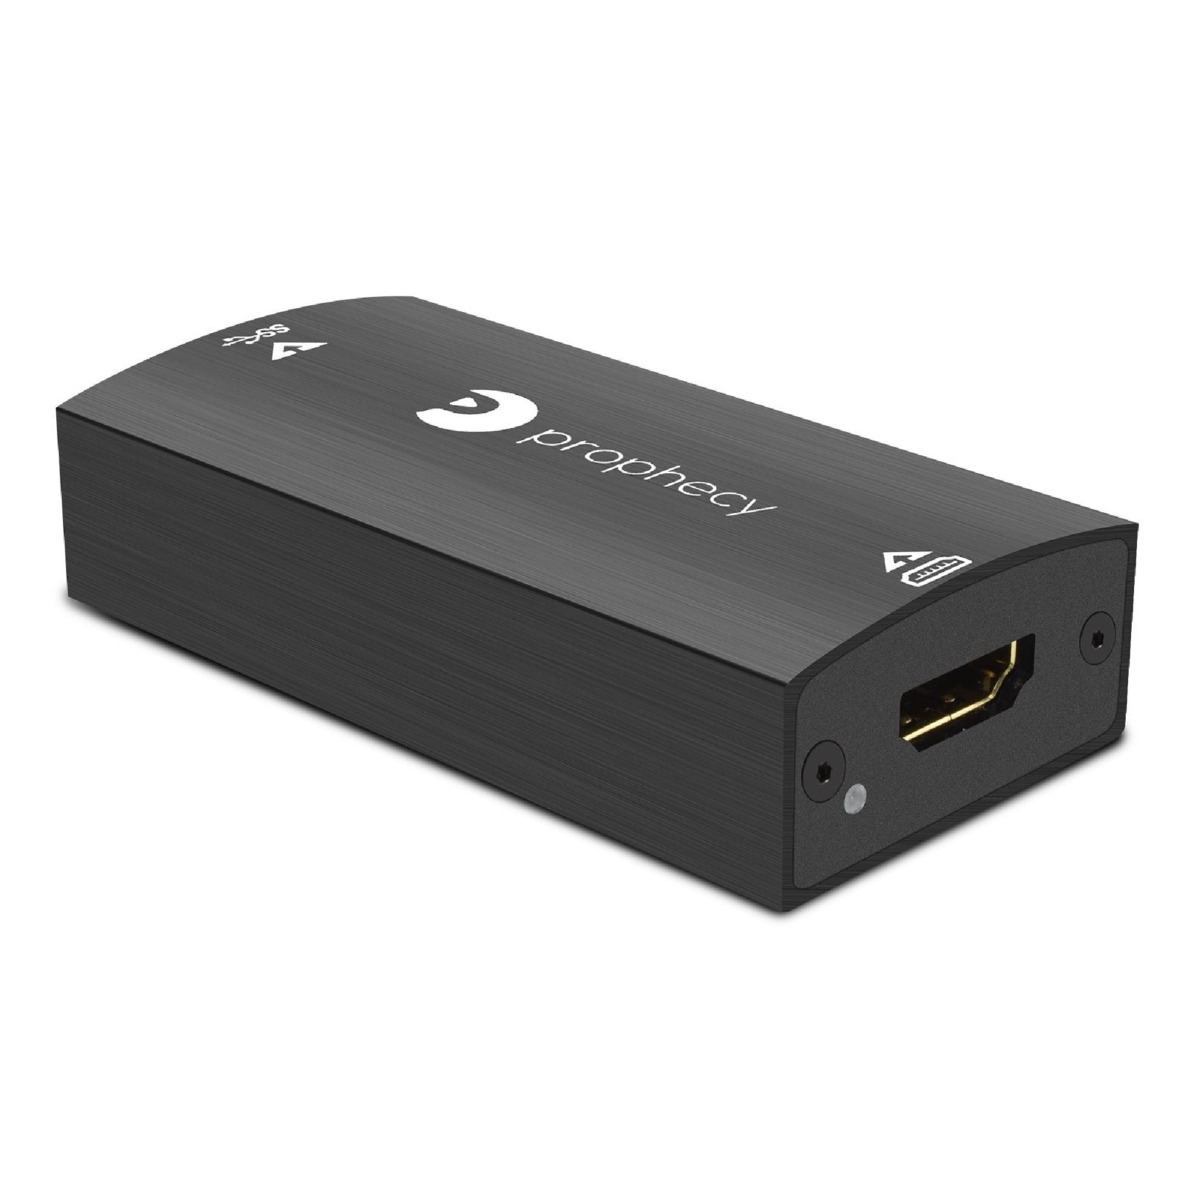 Driver Free Acquisition Card 1080p 60fps HDMI to USB3.0 Video Capture Card Zunate Audio Video Capture Cards USB 3.0 HDMI Game Capture Card Device for Win/Linux/OS X 